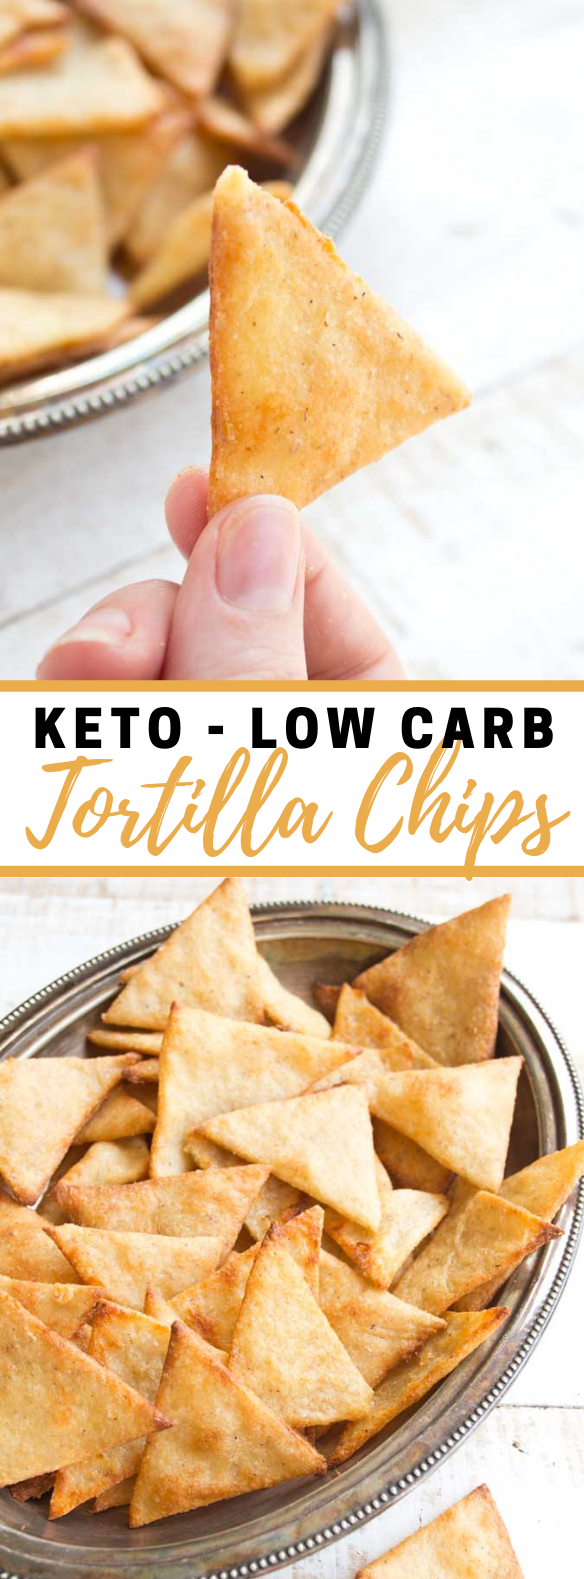 KETO LOW CARB TORTILLA CHIPS #diet #ketogenic